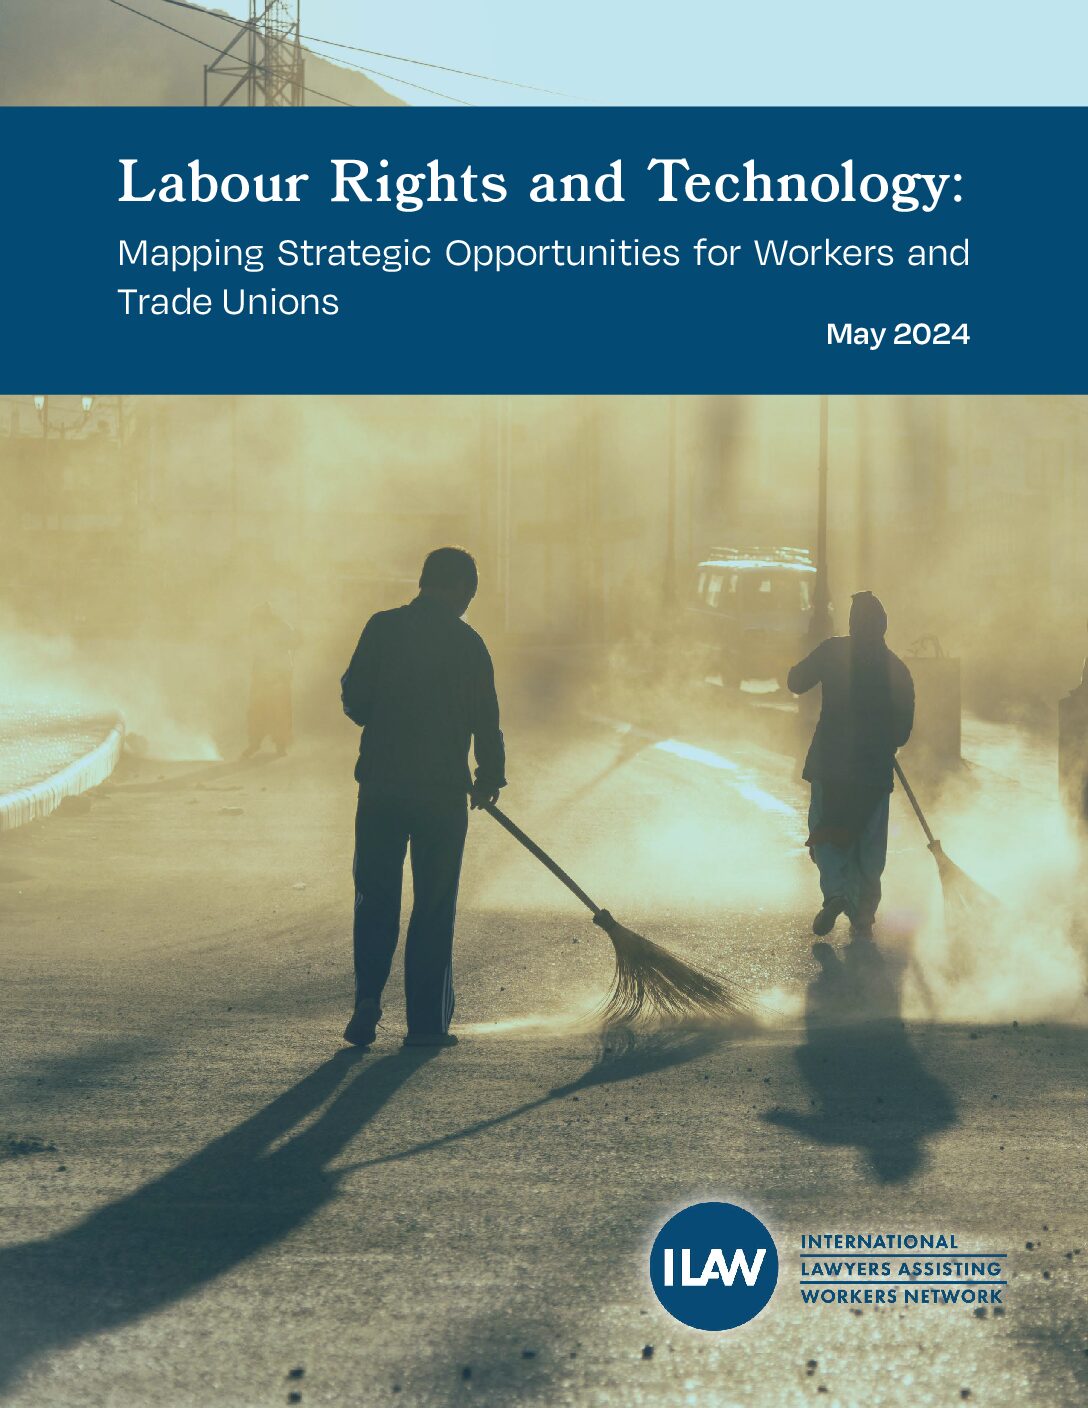 Labor Rights and Technology: Mapping Strategic Opportunities for Workers and Trade Unions